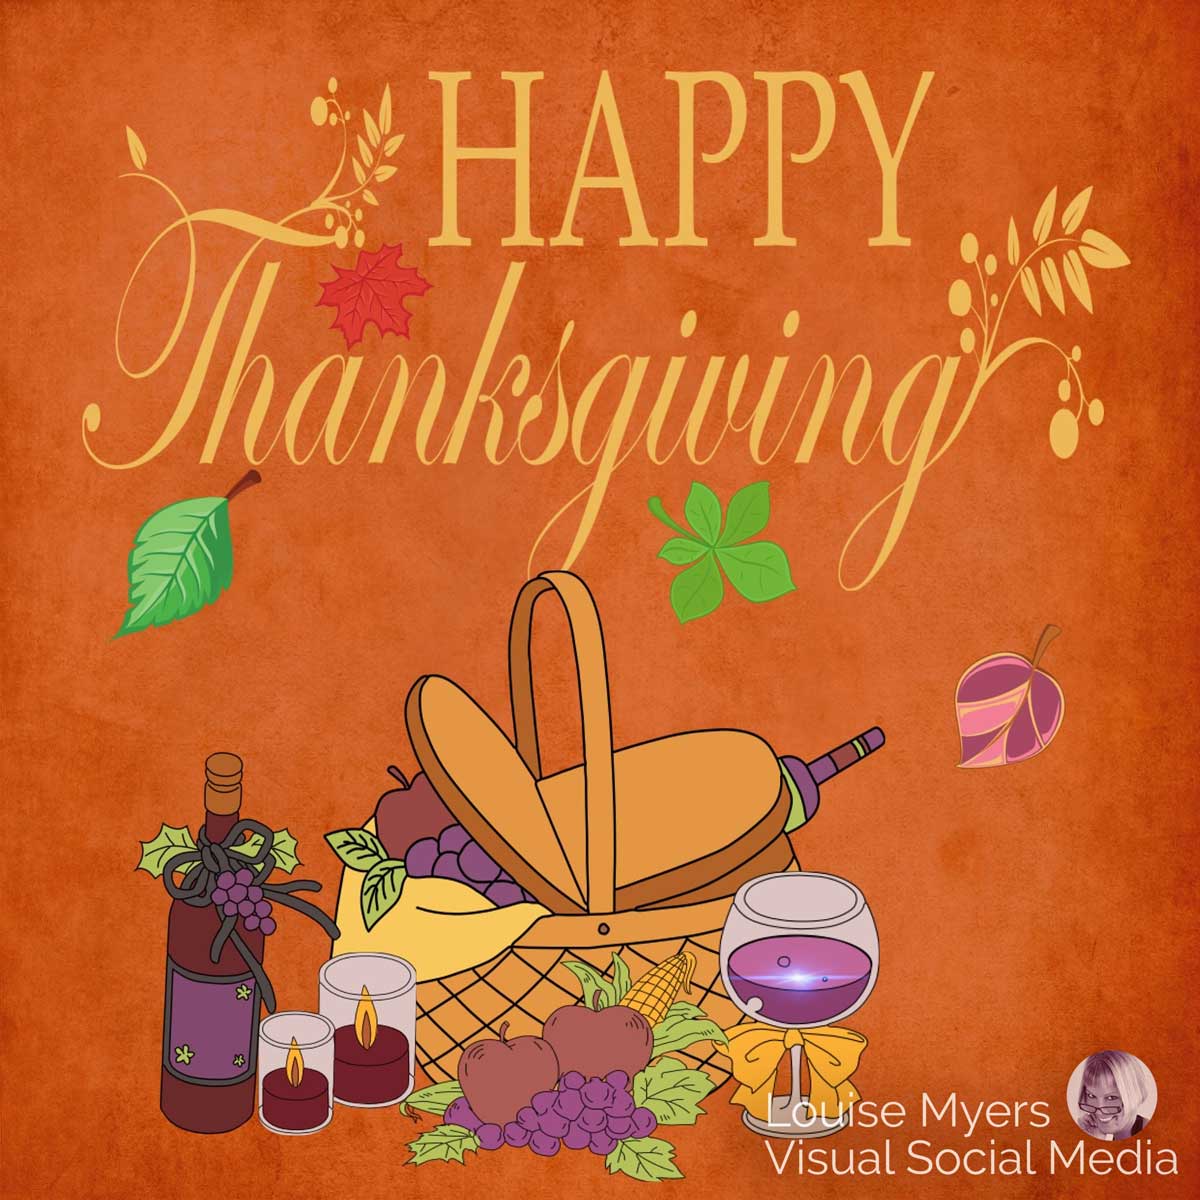 illustration of picnic basket with wine and fruit on rusty orange background says happy thanksgiving.